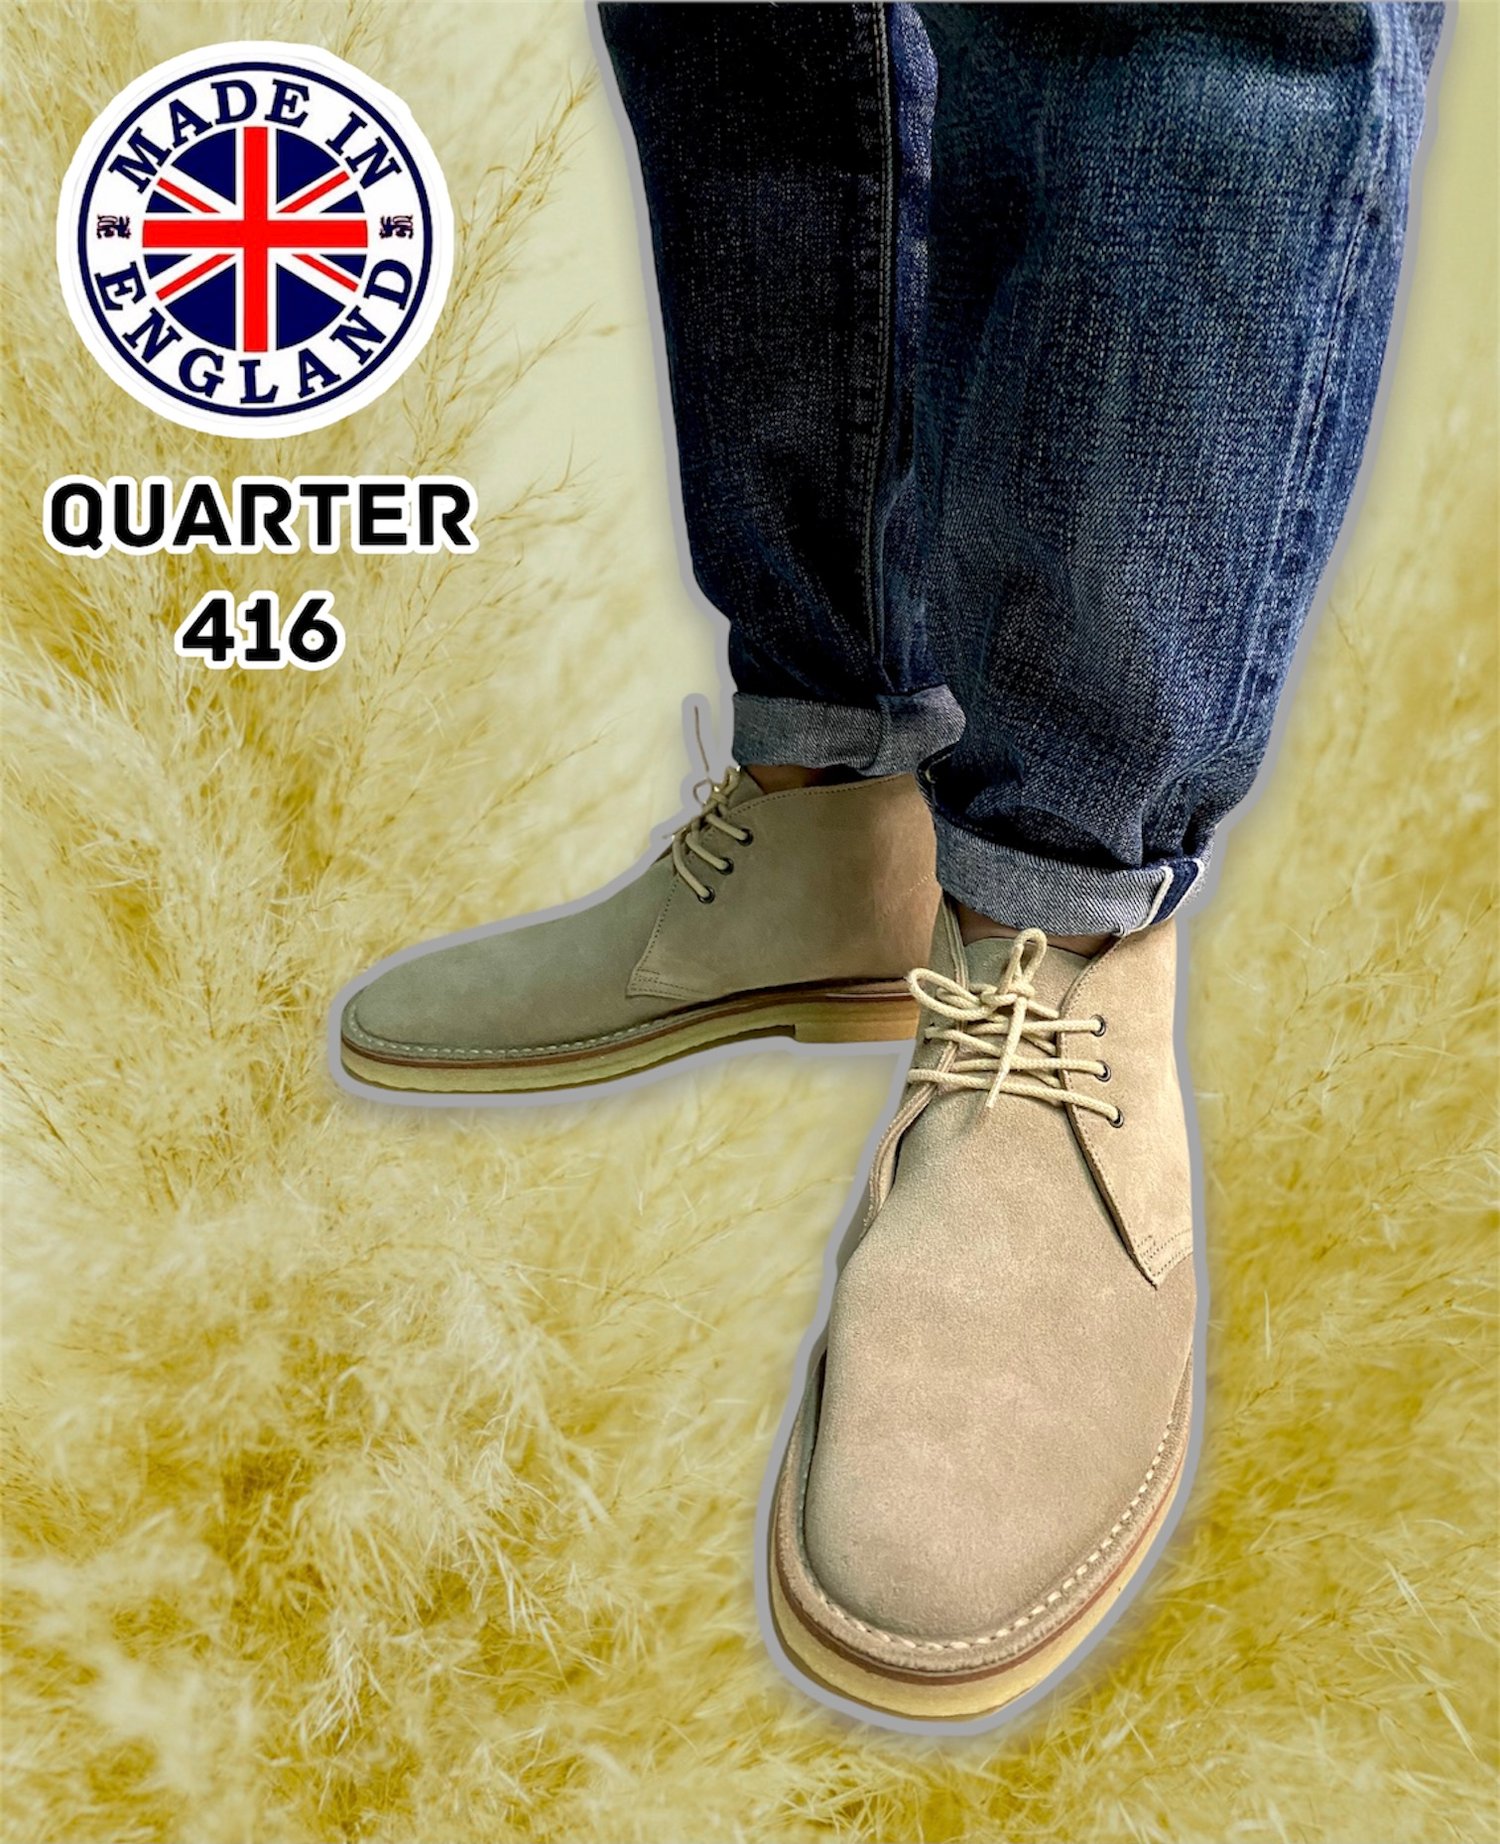 Image of Jadd classic 3 eyes chukka boots khaki suede made in England 